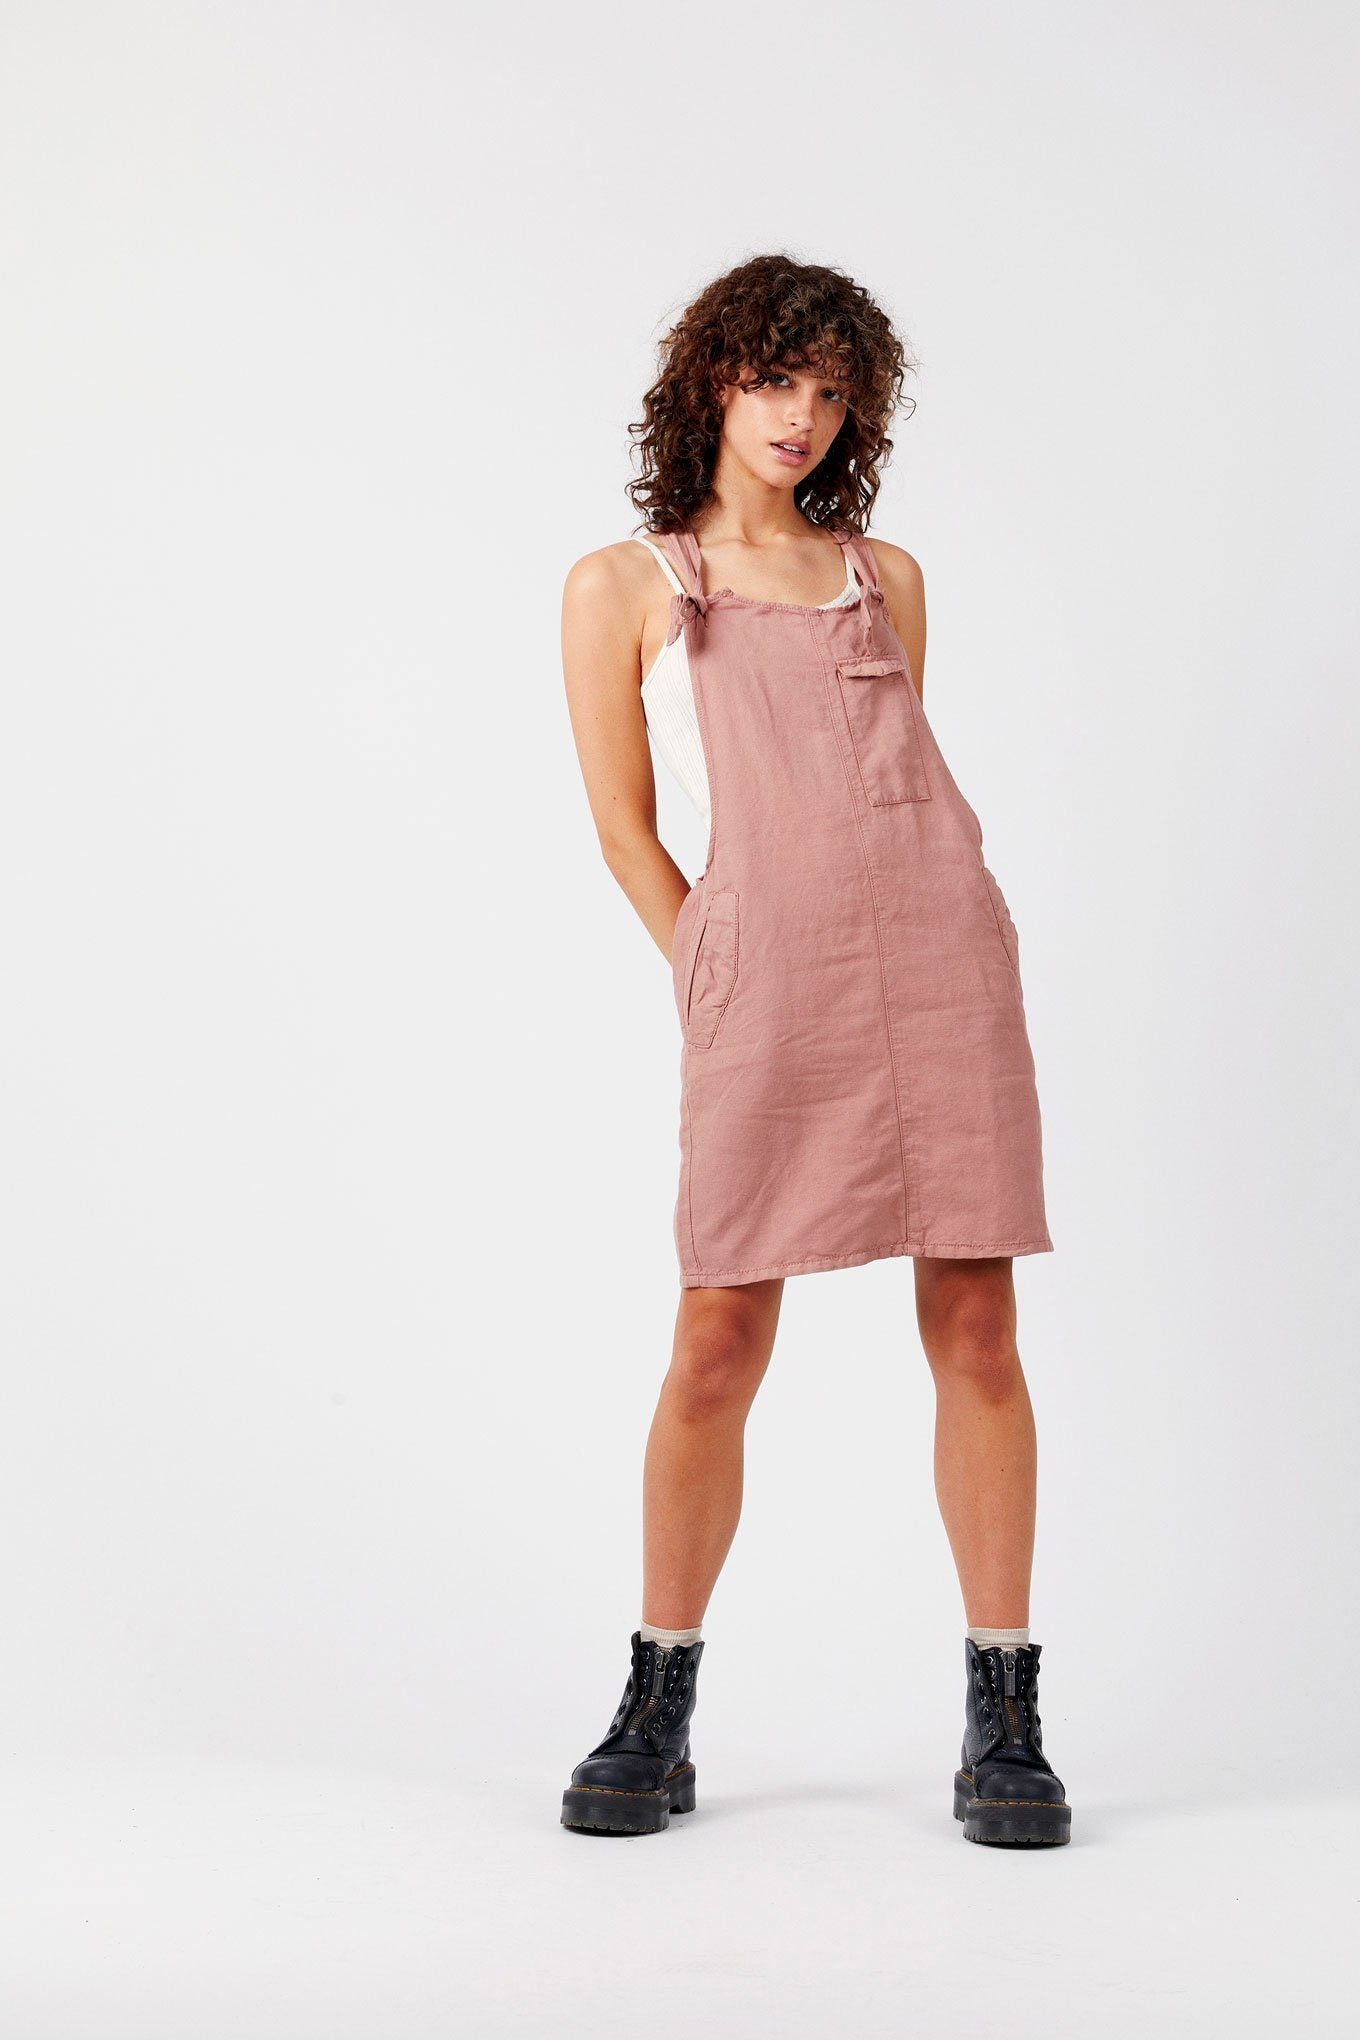 PEGGY Pink - GOTS Organic Cotton Dress by Flax & Loom, SIZE 4 / UK 14 / EUR 42